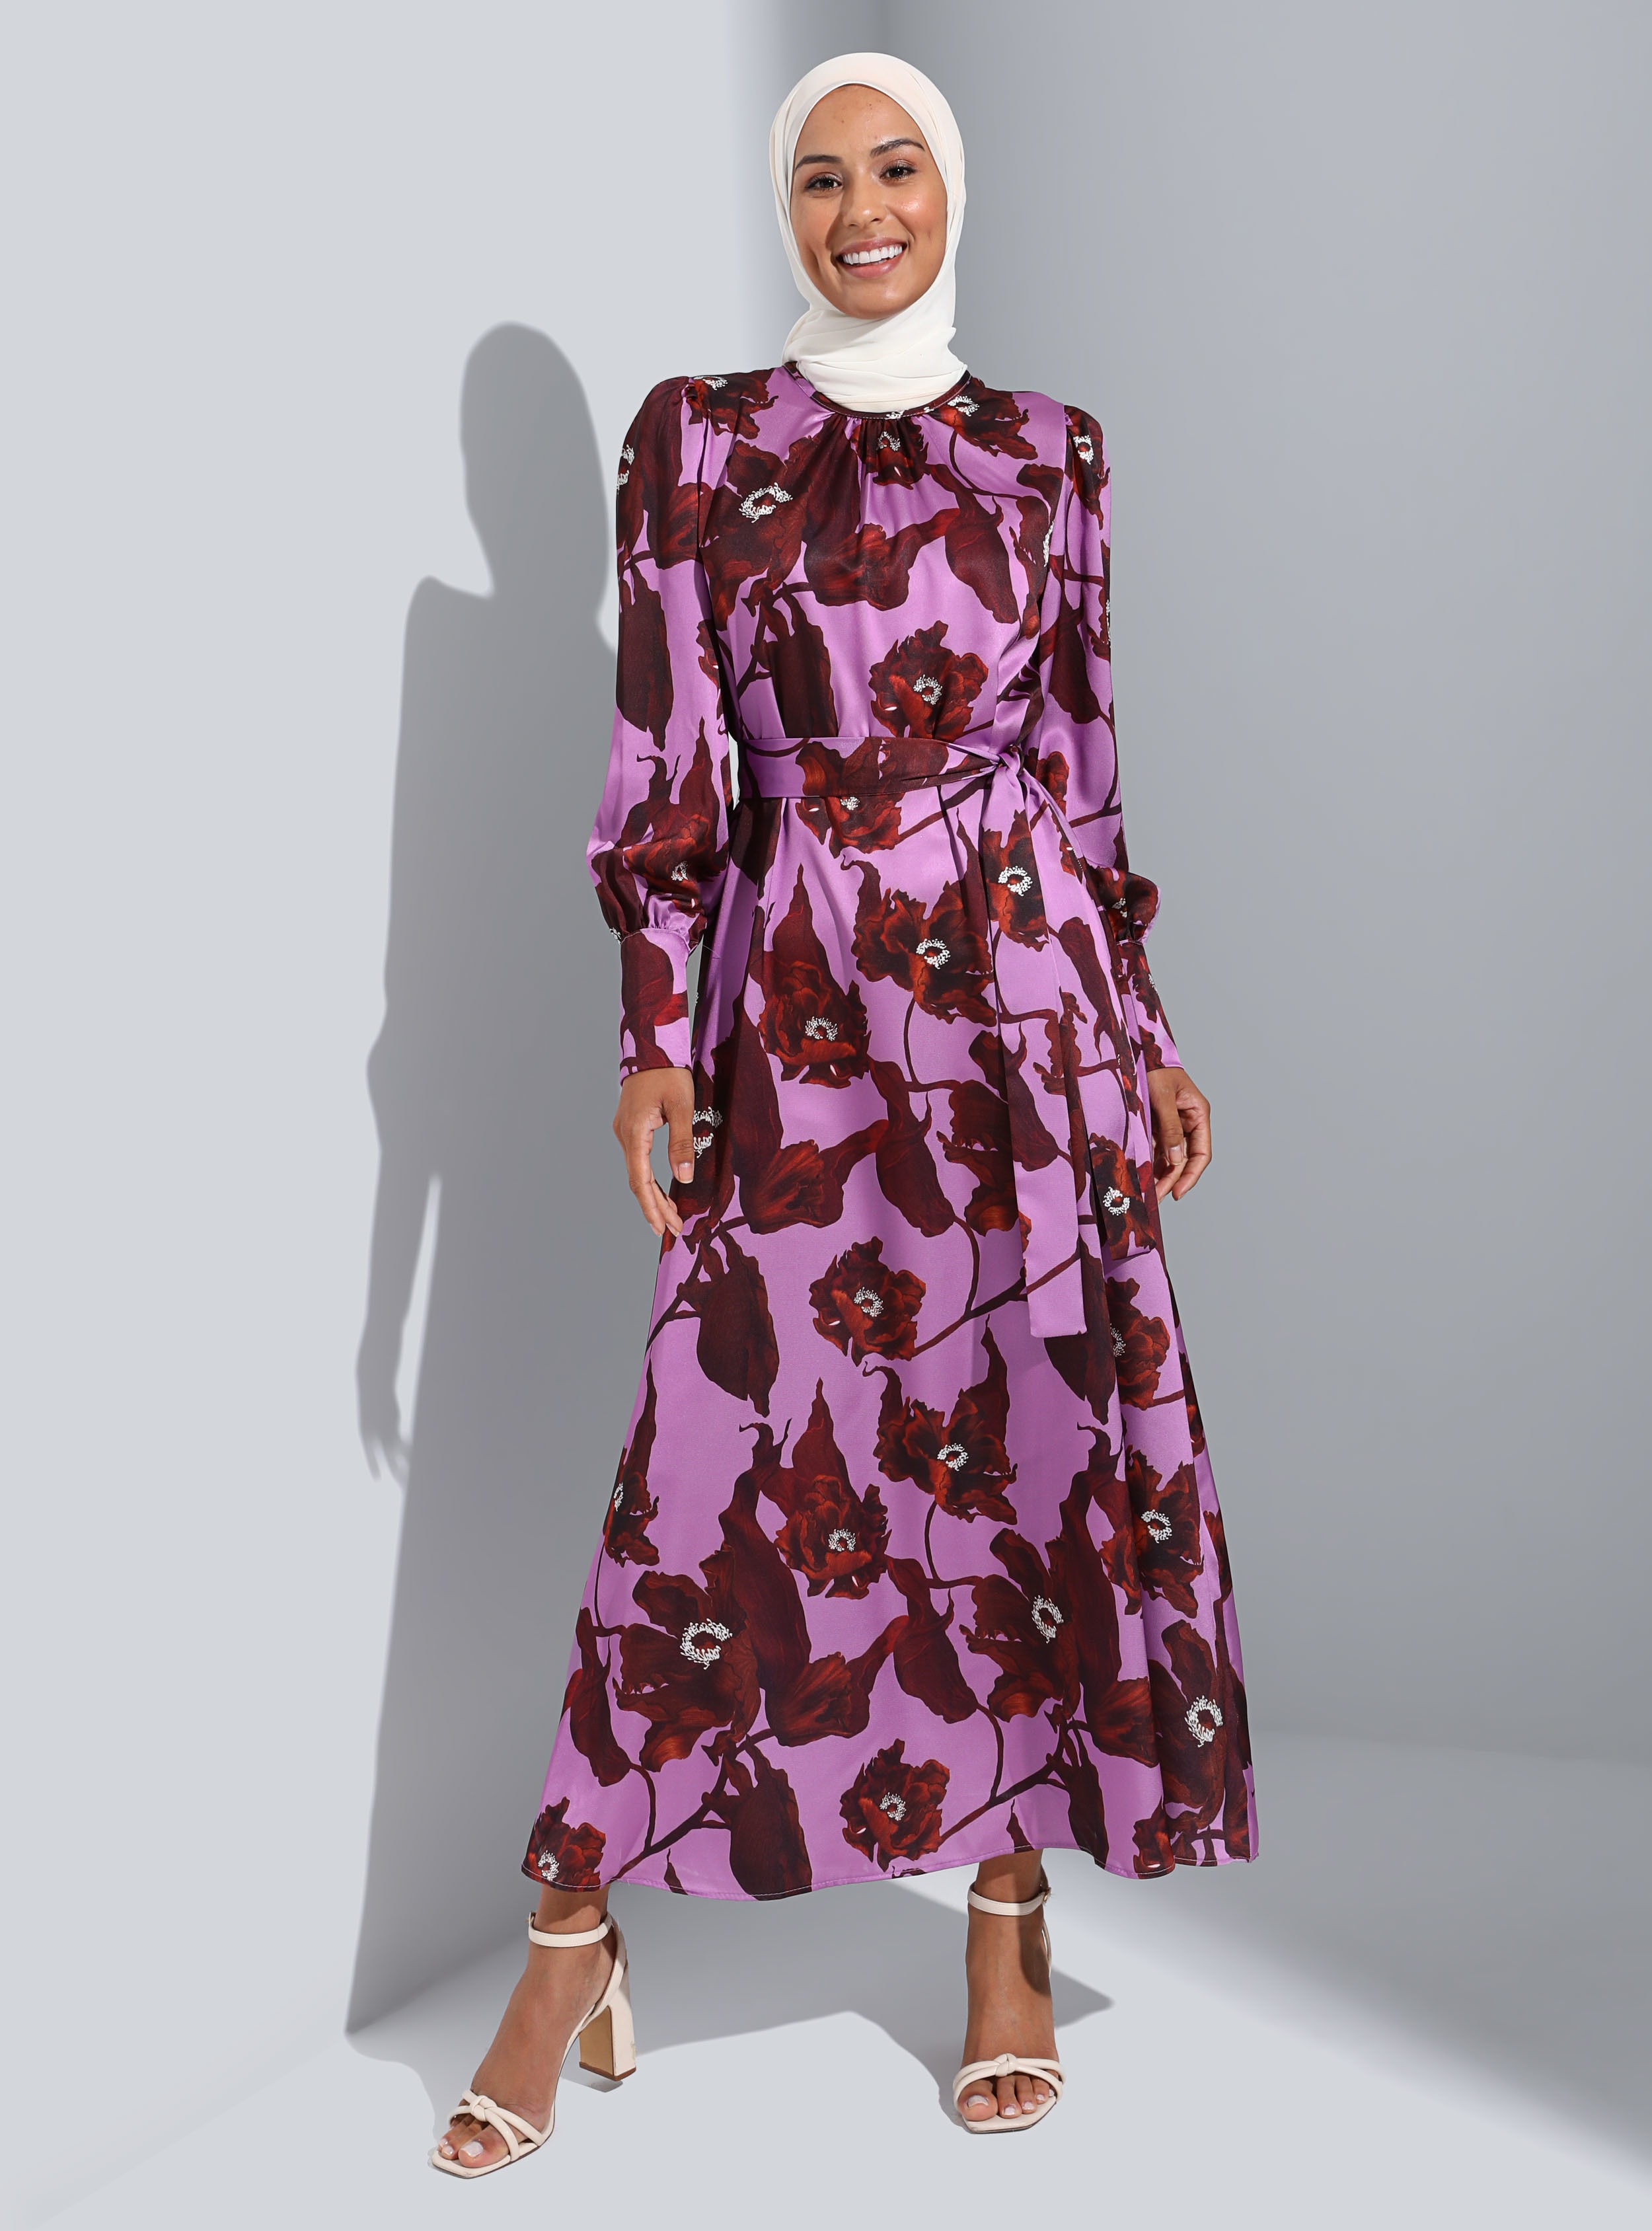 Lilac - Maroon - Floral - Crew neck - Unlined - Modest Dress